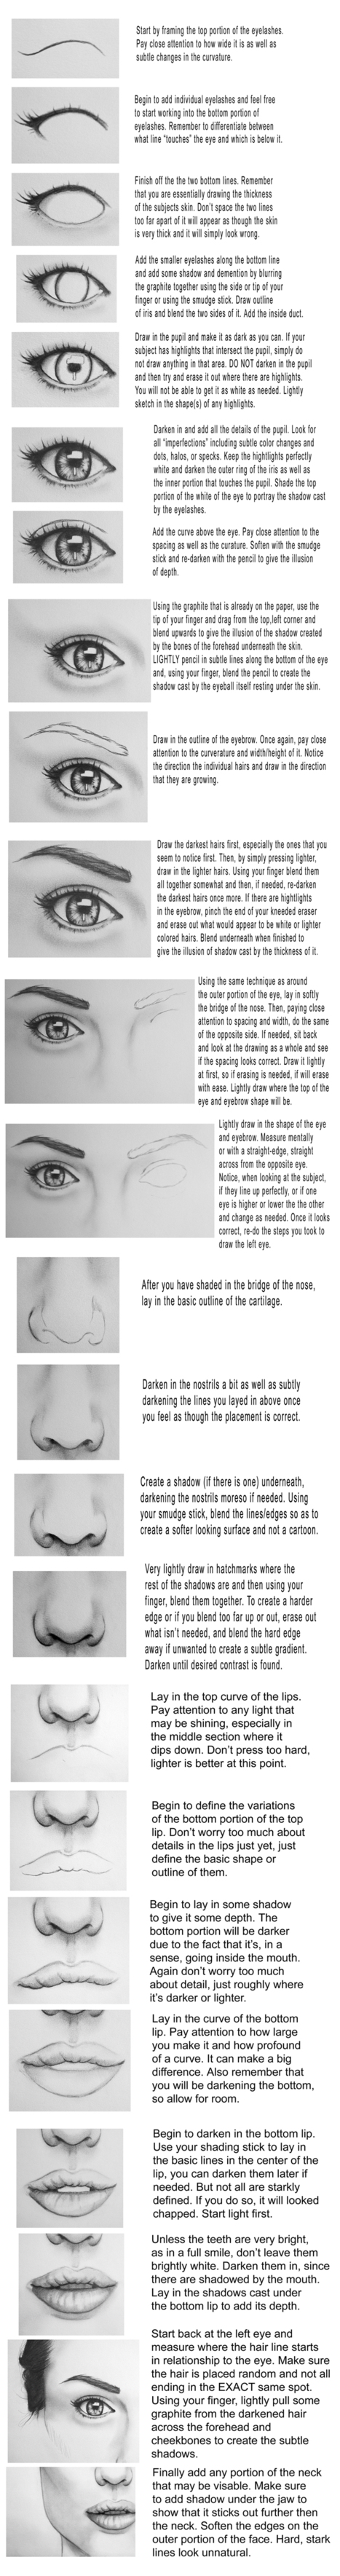 reference guide' in Drawing and Painting Tutorials